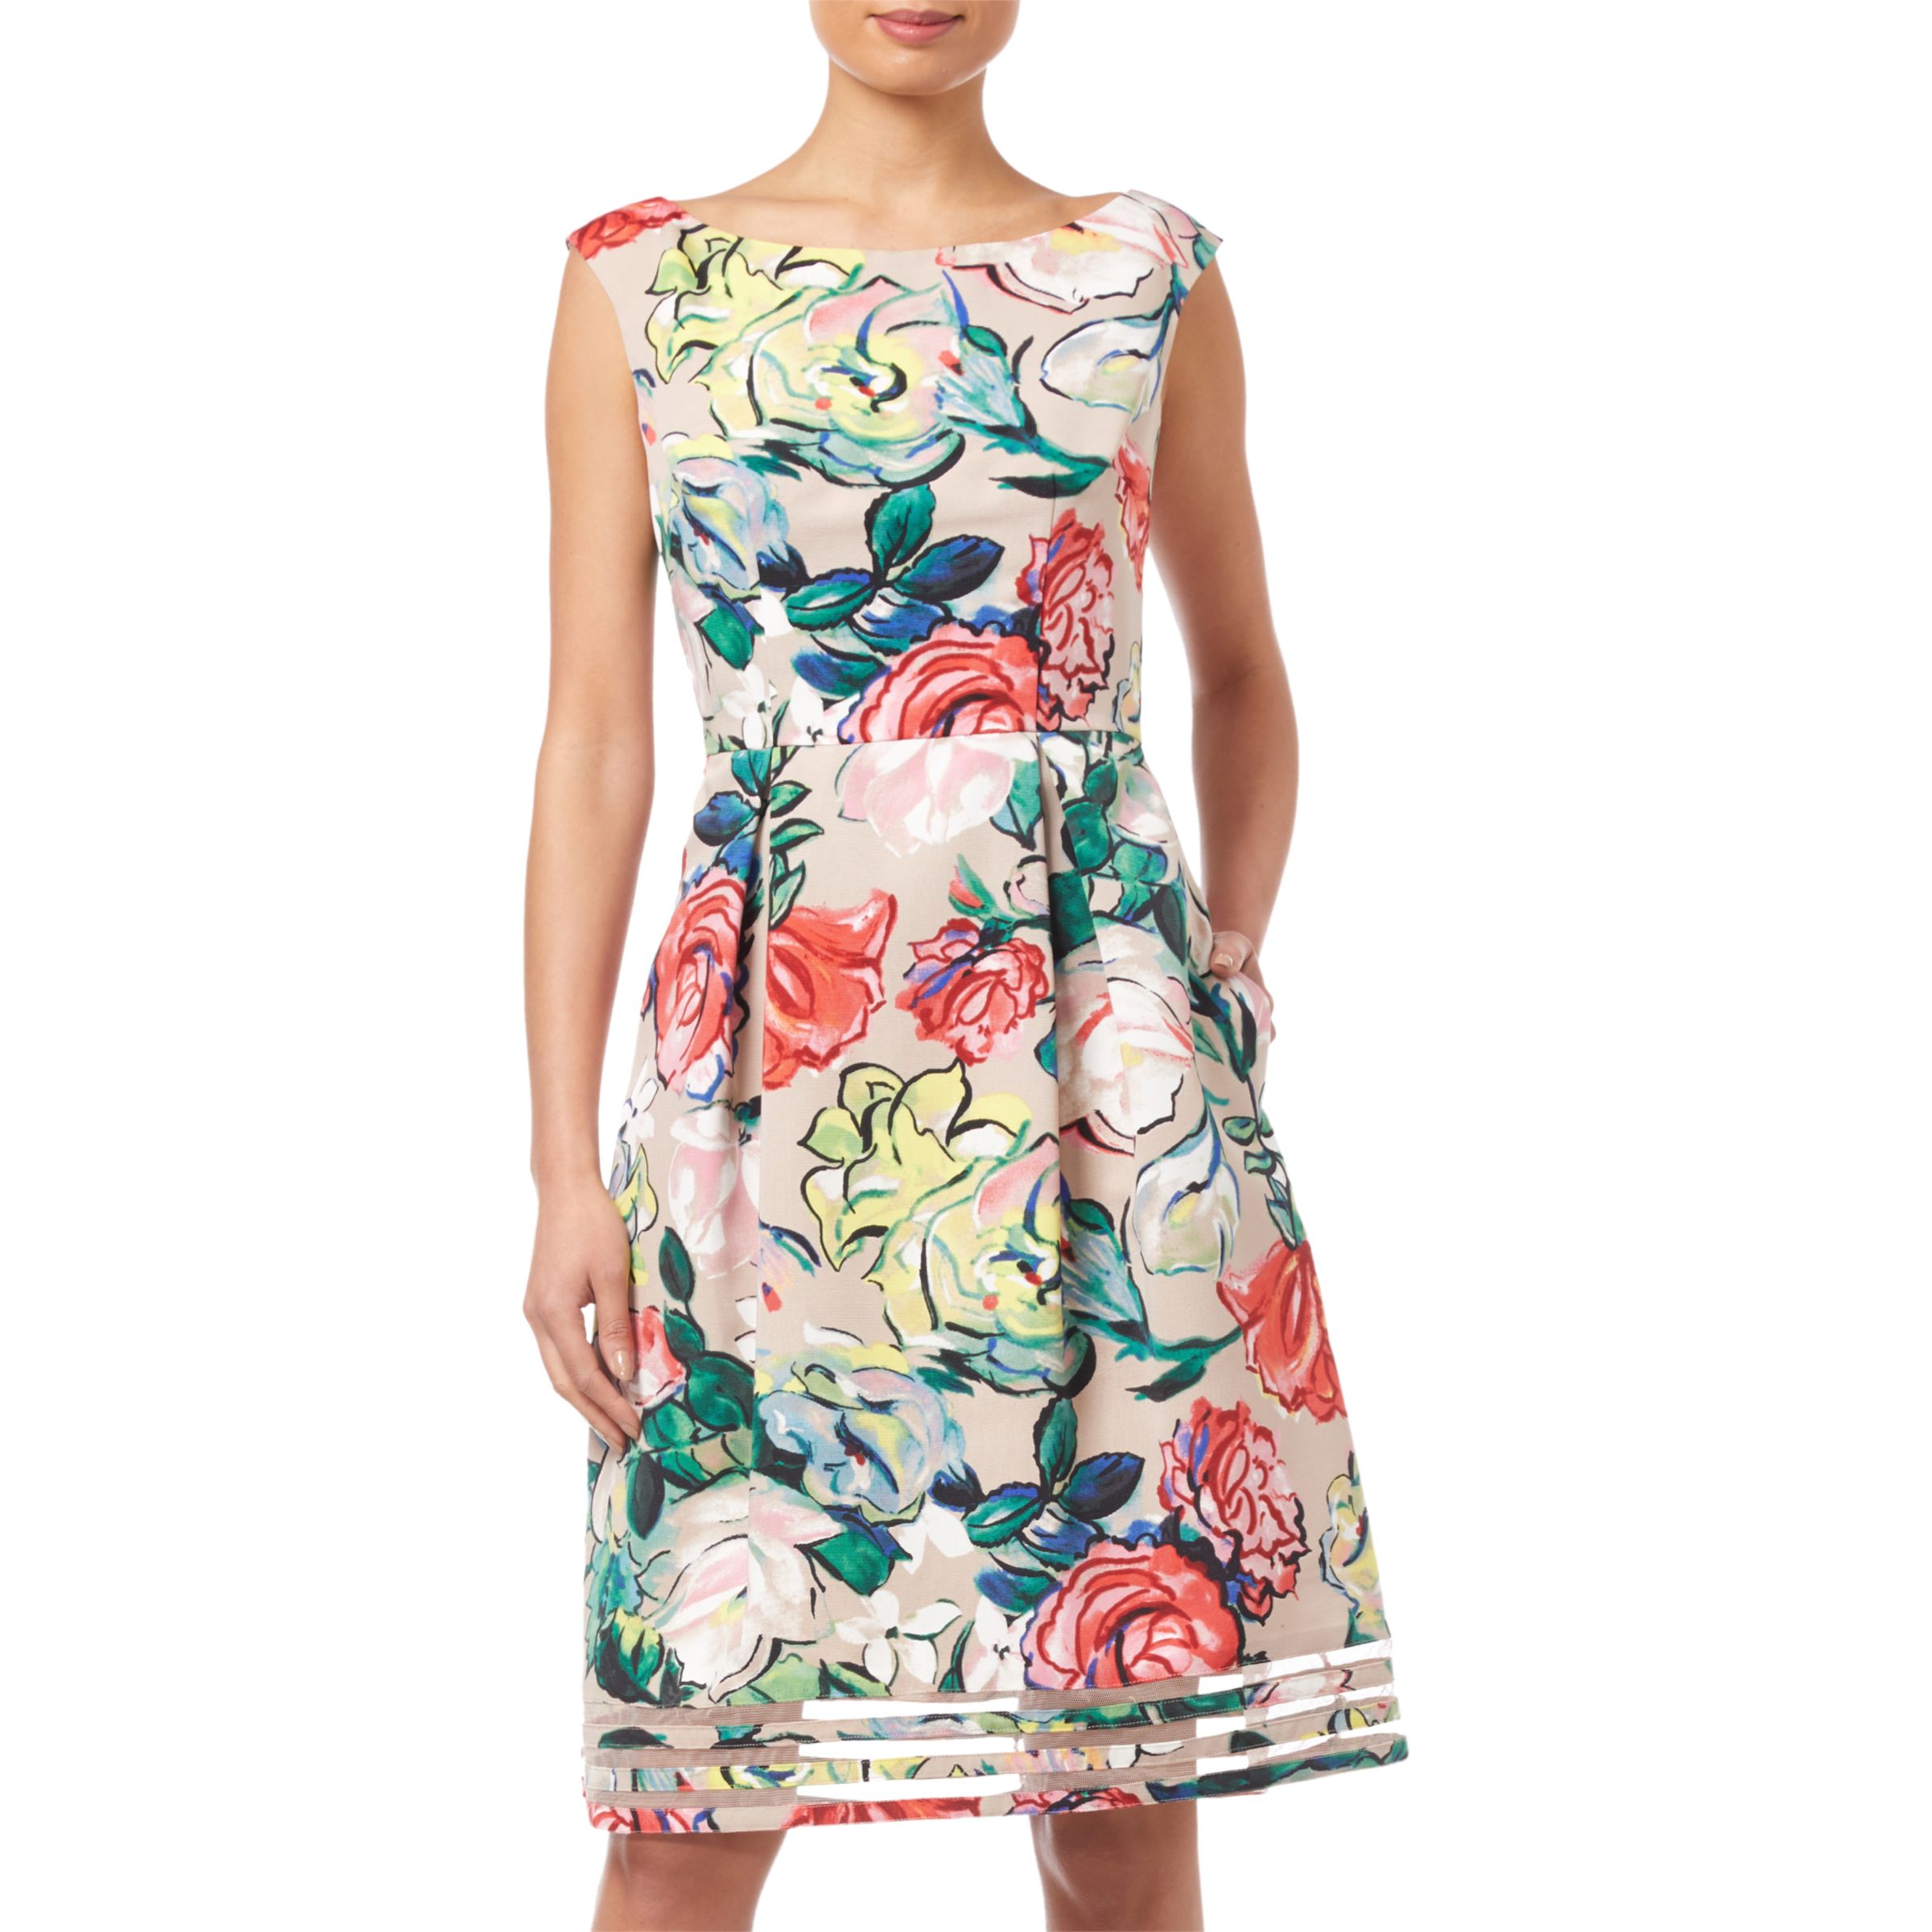 Adrianna Papell Stained Glass Dress, Multi